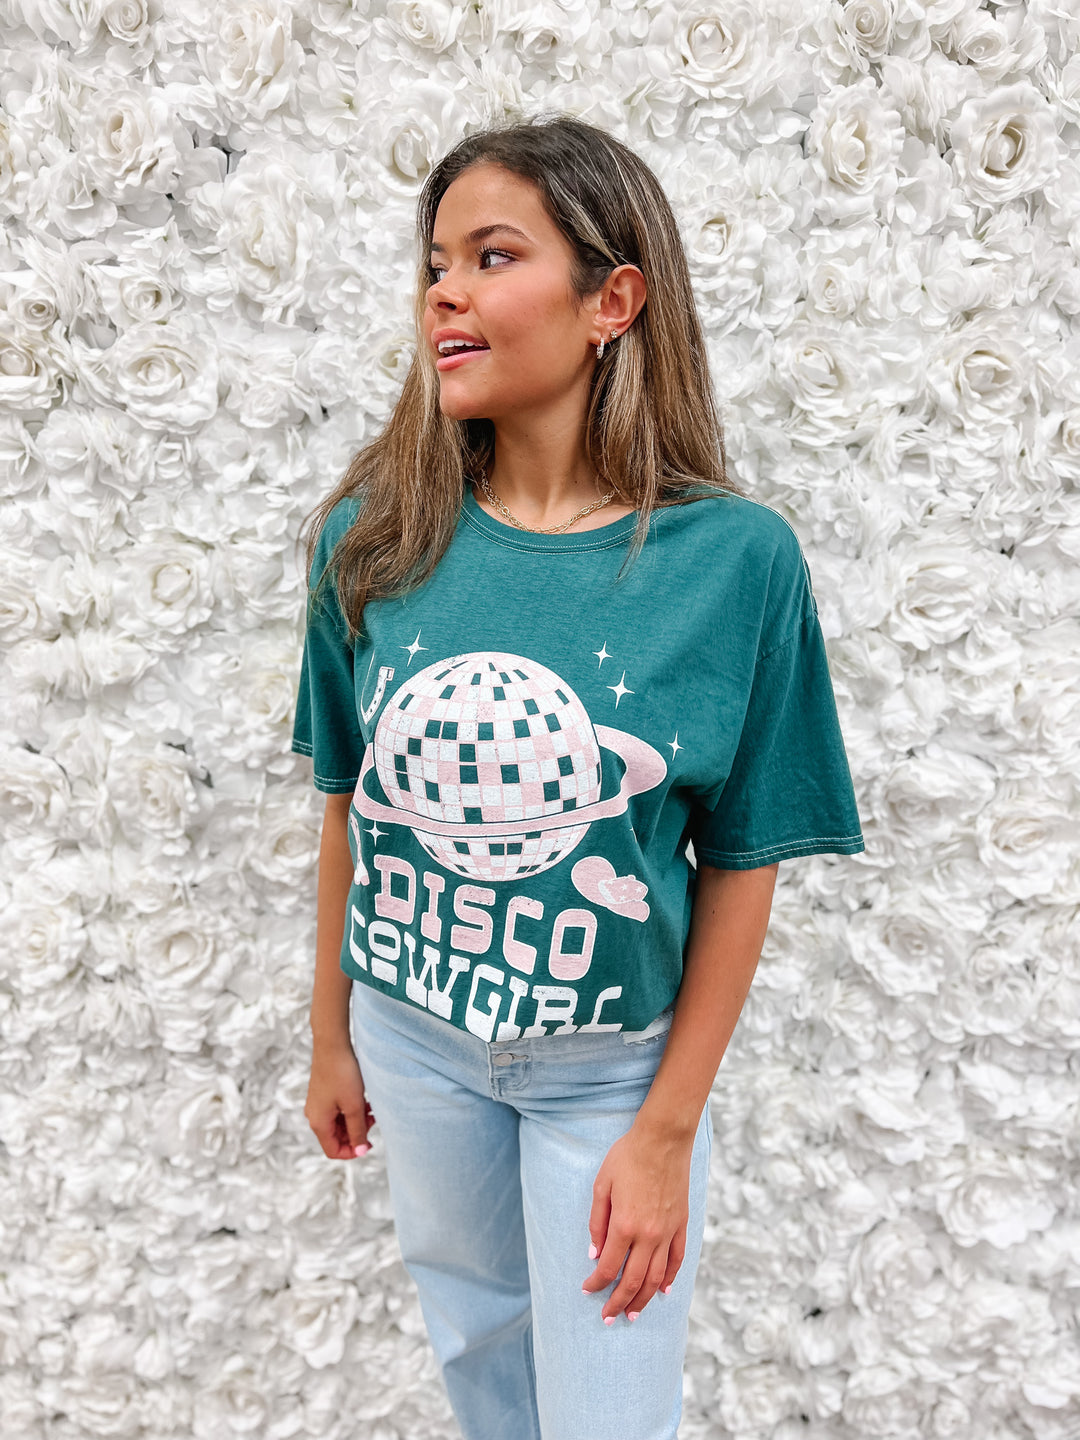 Disco Cowgirl Tee - Sienna Sky Boutique